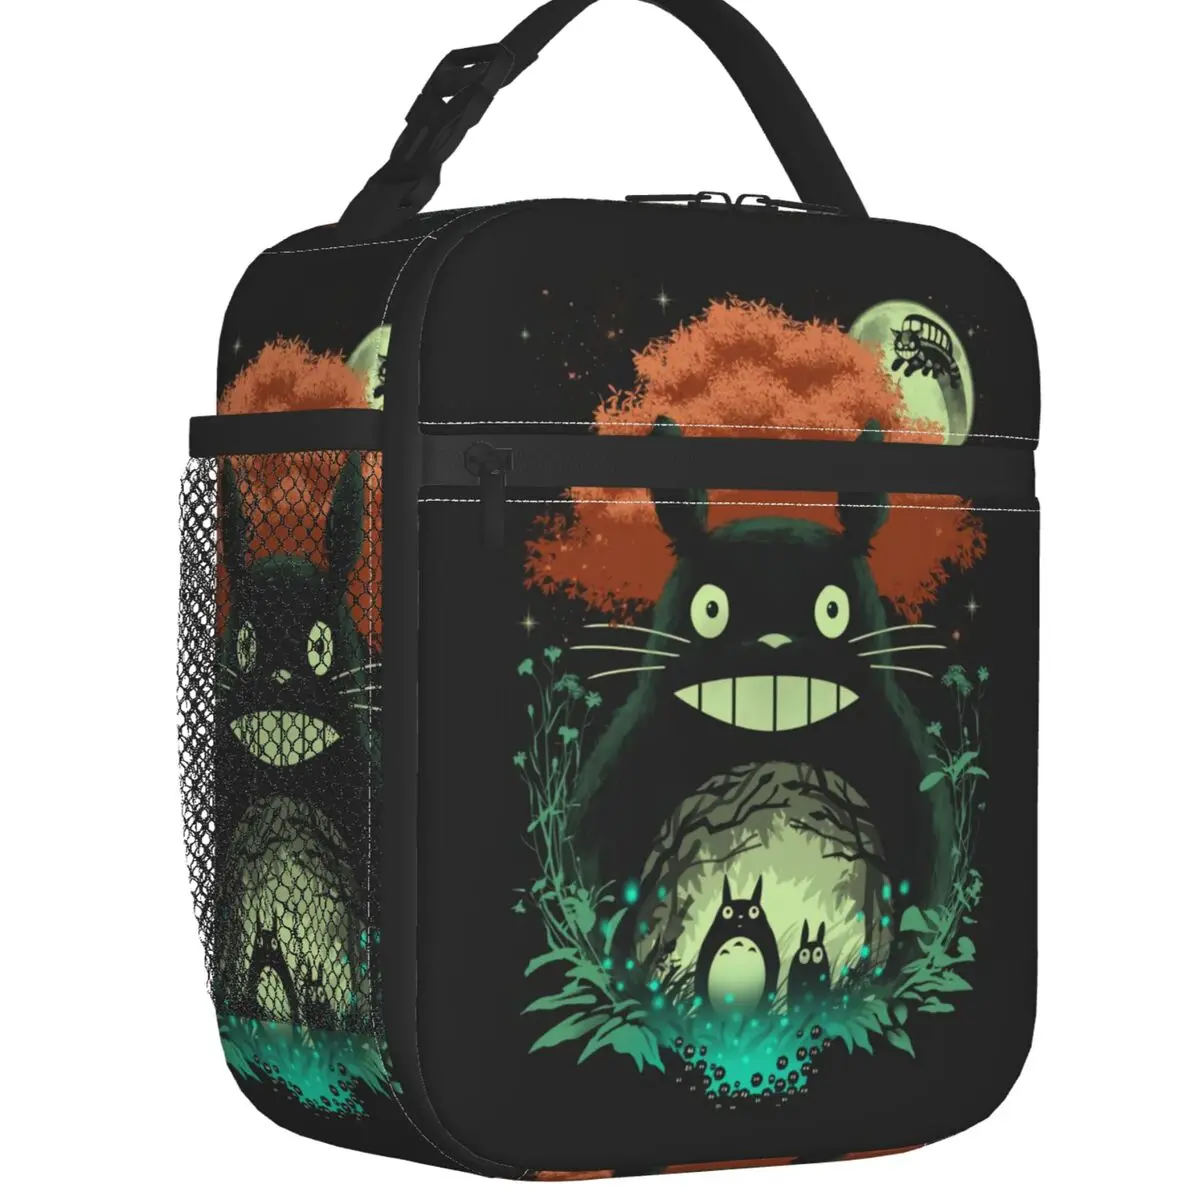 My Neighbor Totoro Anime Thermal Insulated Lunch Bag Hayao Miyazaki Portable Lunch Container Kids School Multifunction Food Box